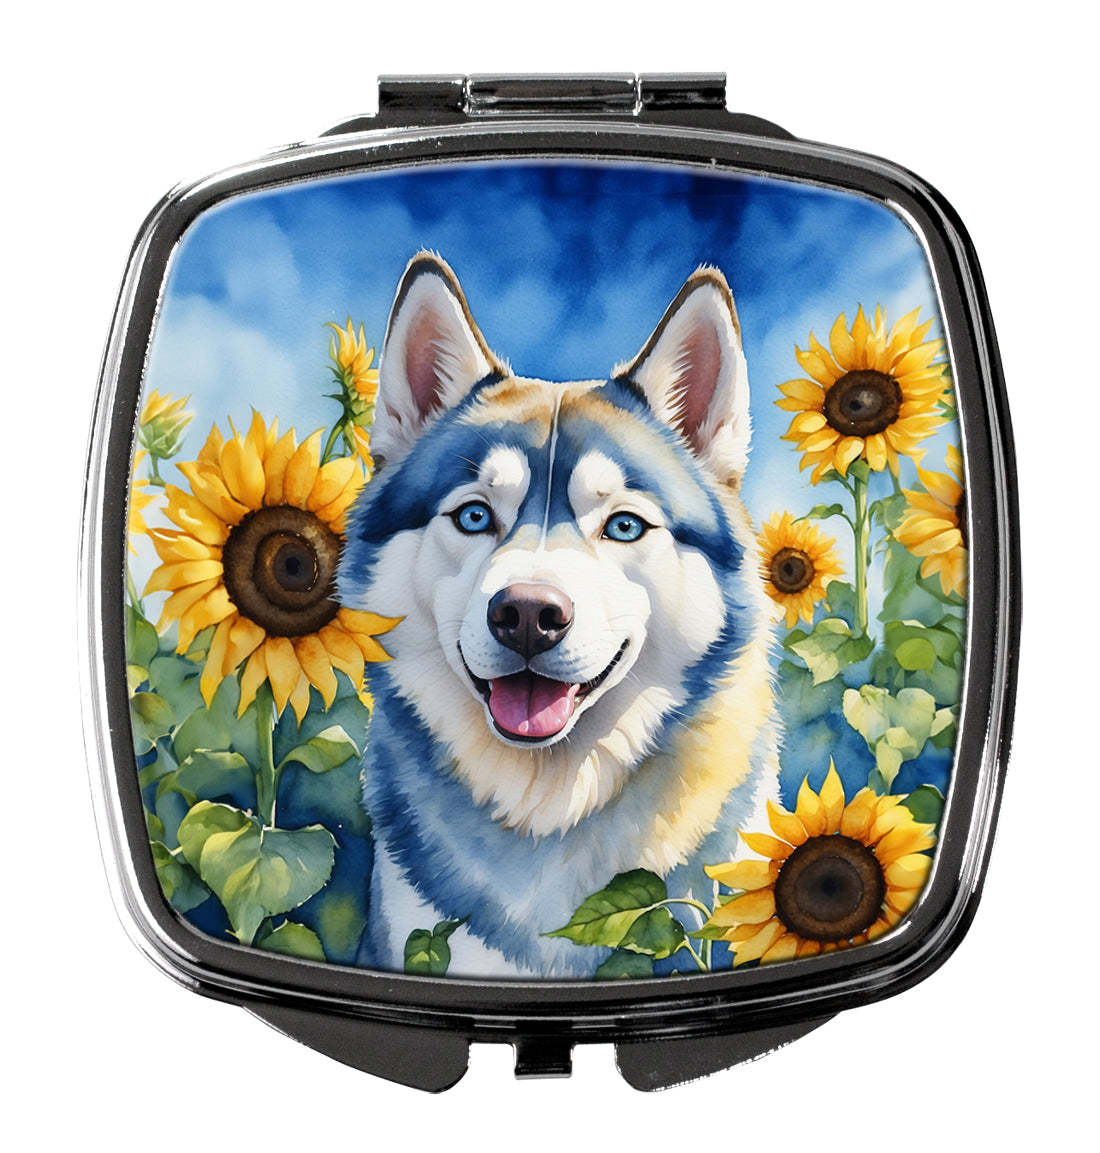 Buy this Siberian Husky in Sunflowers Compact Mirror